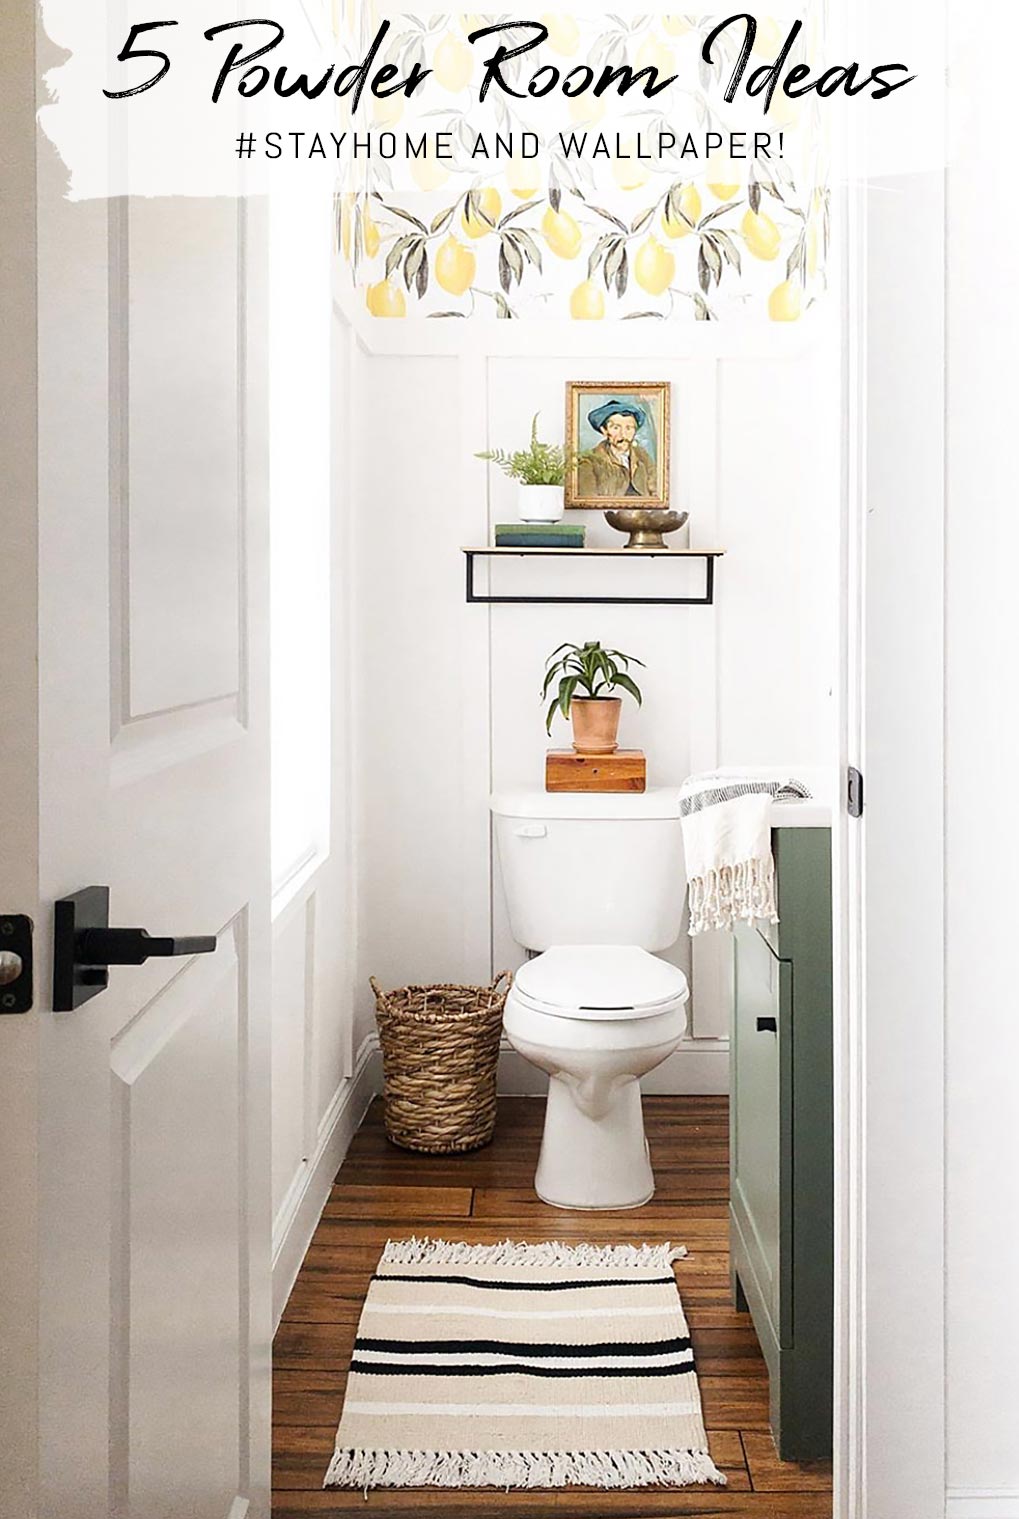 5 Beautifully Wallpapered Powder Rooms | Ideas For Your Stay Home ...